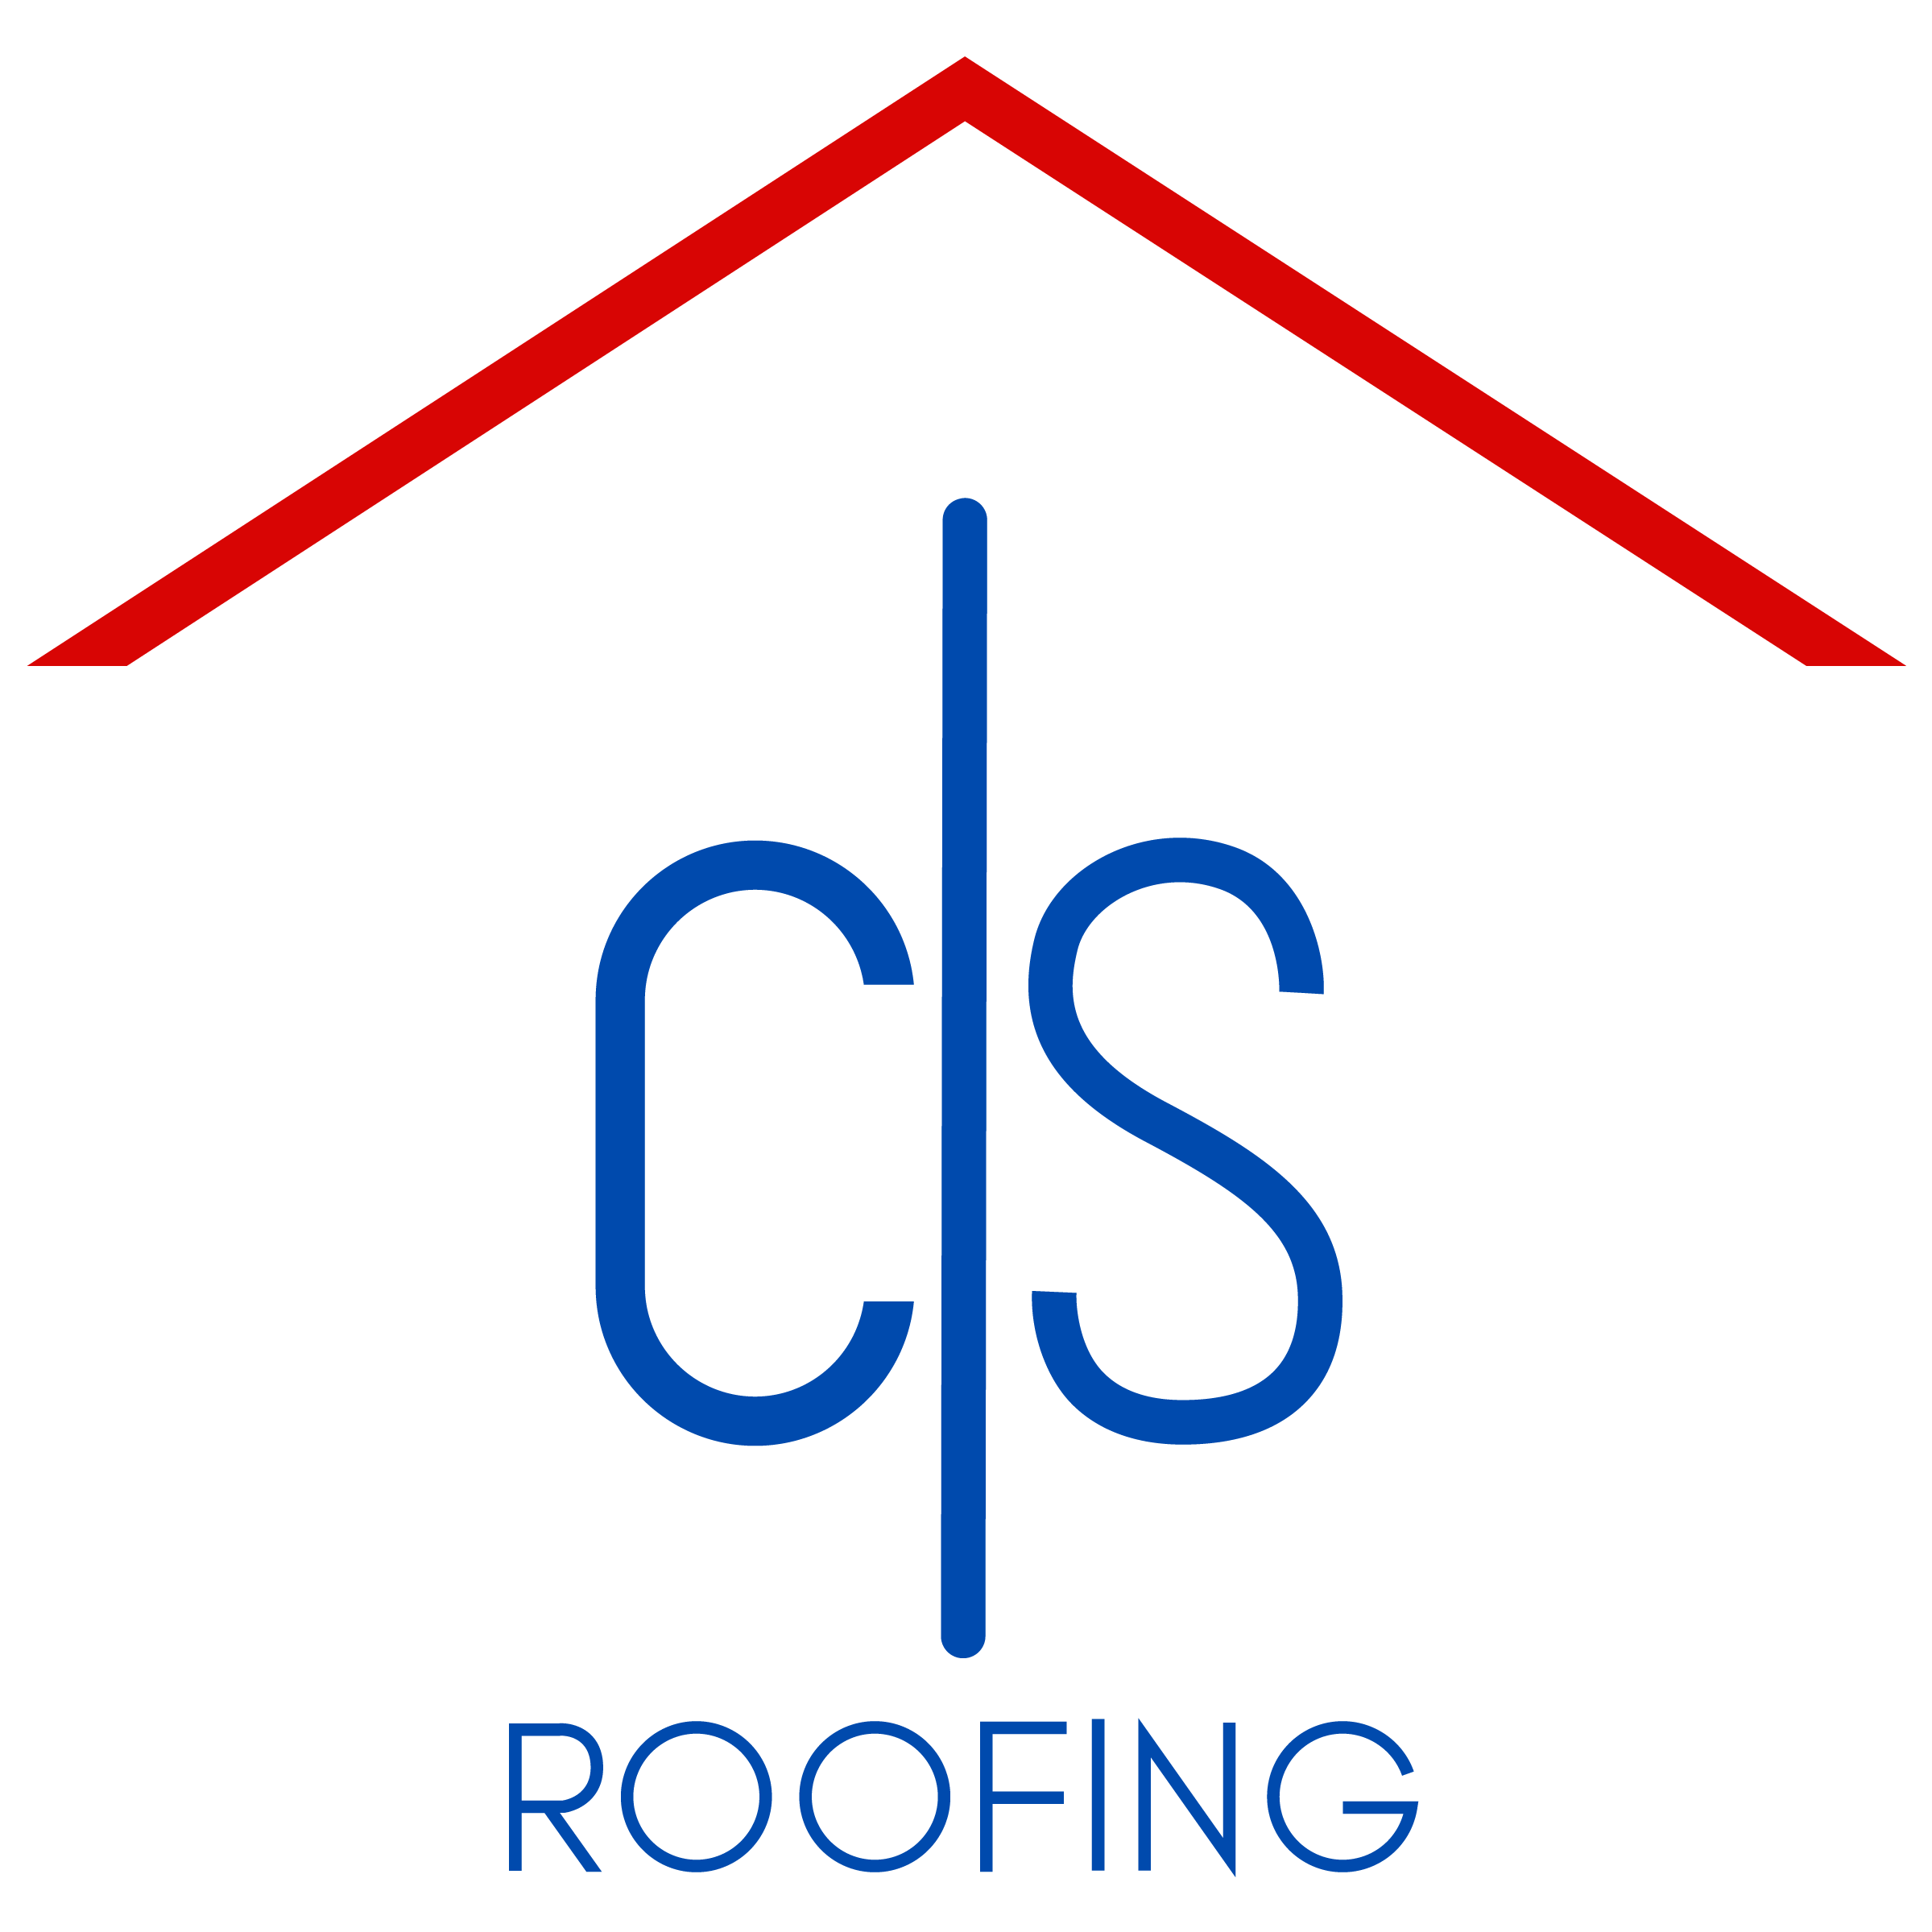 C&S Roofing and Restoration